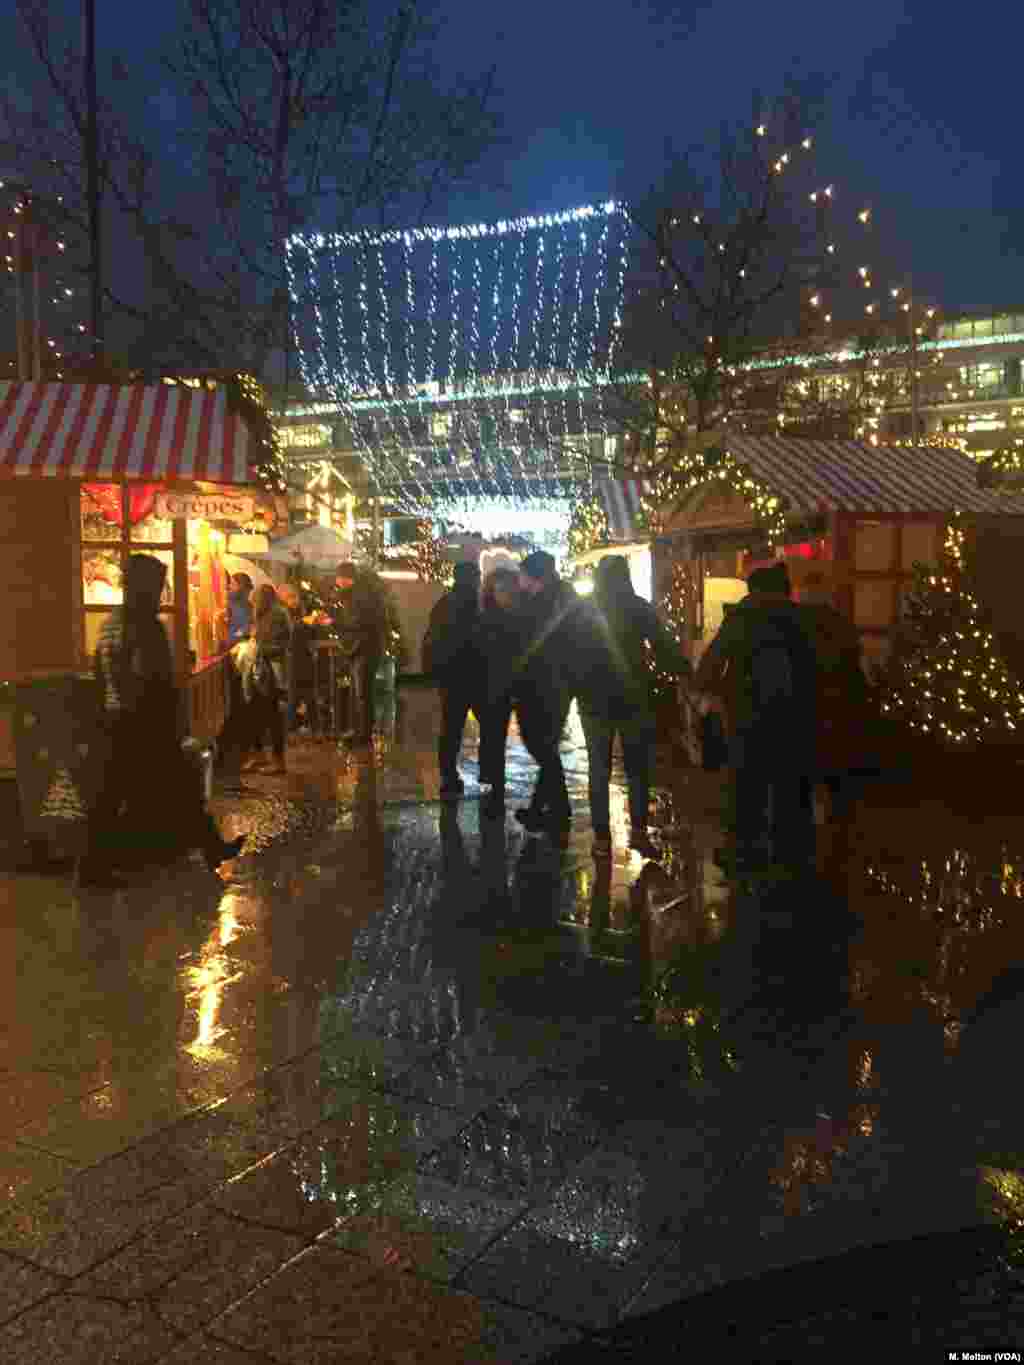 Chilly temperatures and a steady drizzle did not deter shoppers intent on enjoying sparkling lights, mulled wine, and colorful holiday offerings at Berlin's Christmas markets, Nov. 27, 2017.